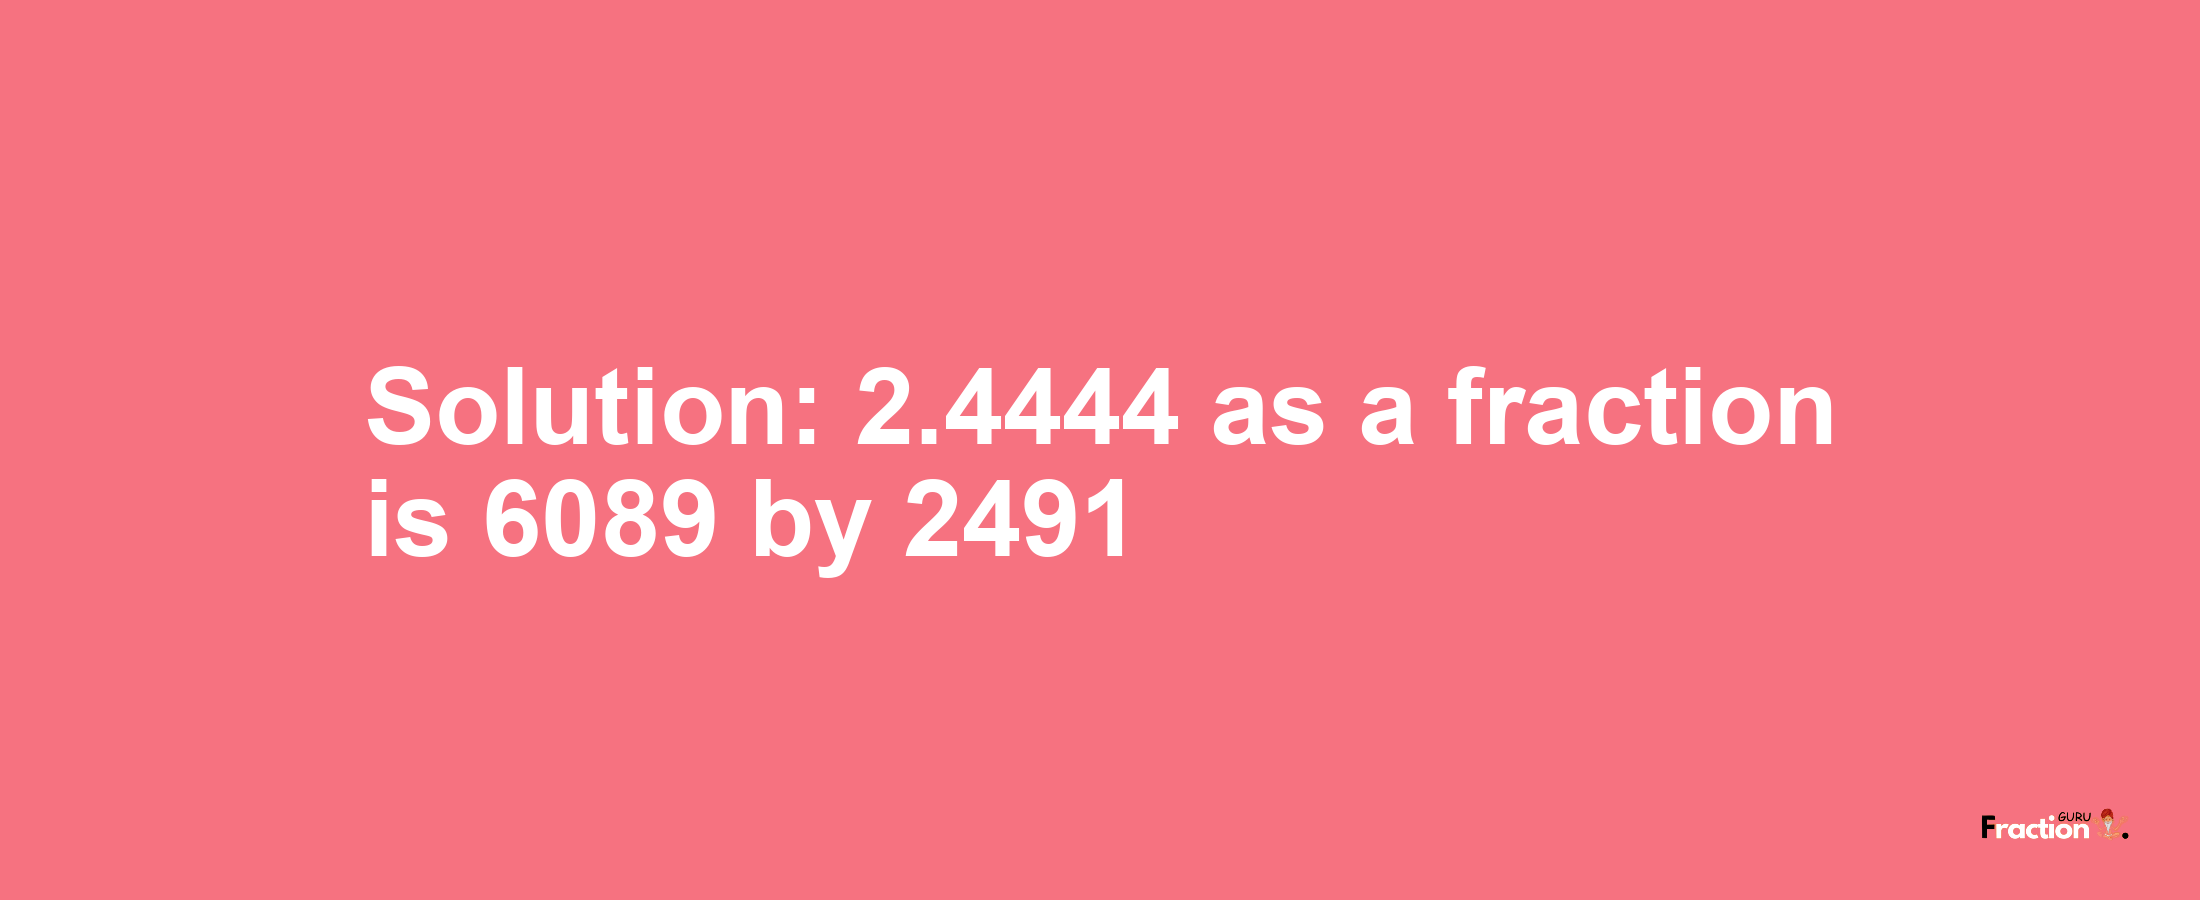 Solution:2.4444 as a fraction is 6089/2491